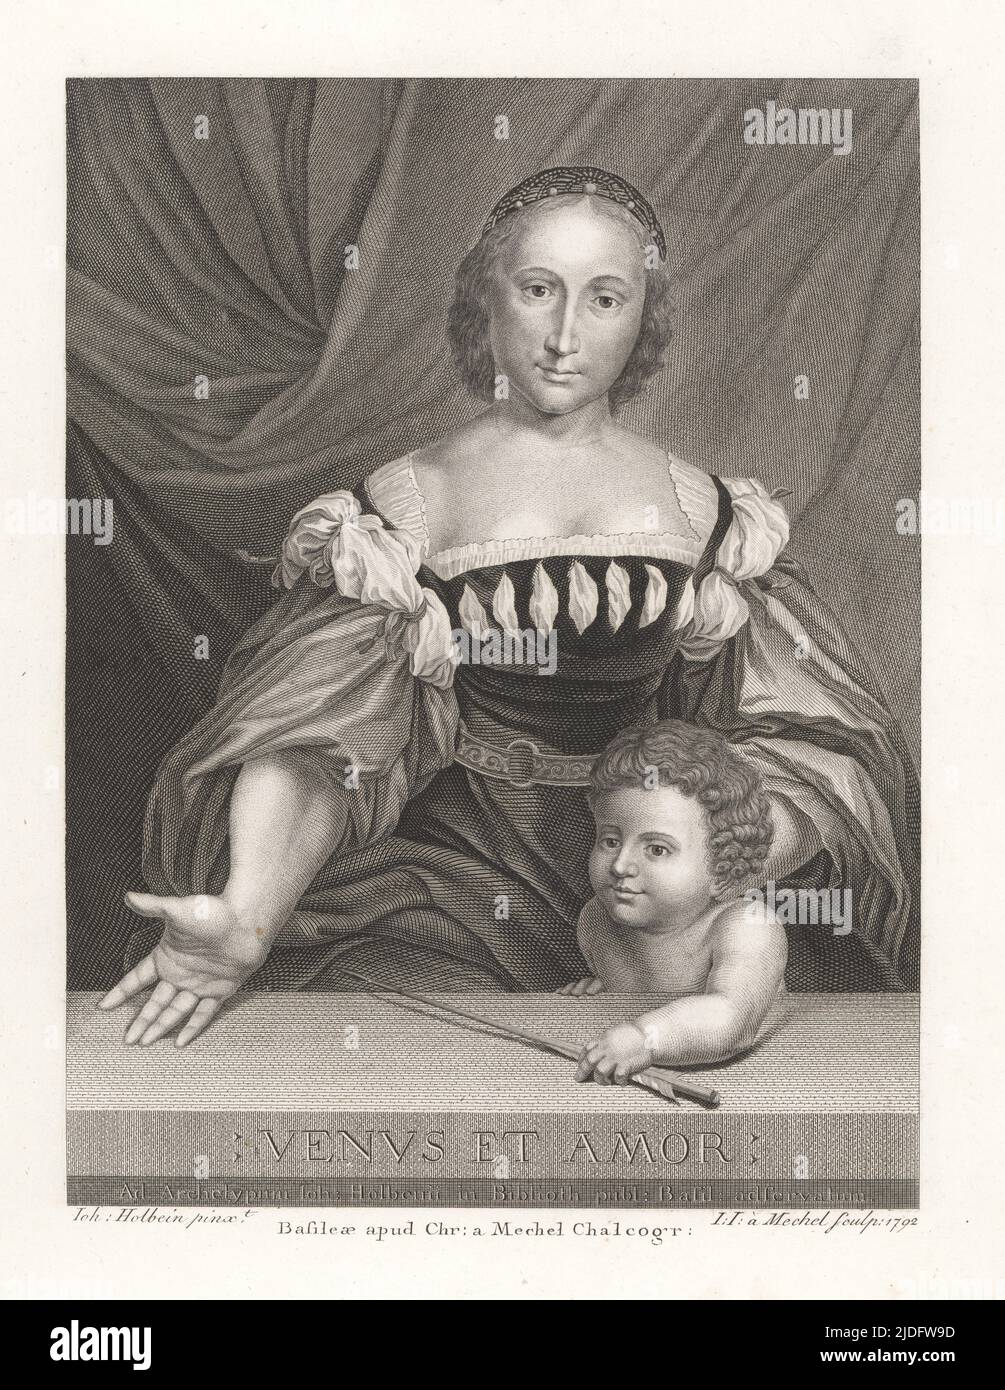 Portrait of Magdalena Offenburg as Venus, Roman goddess of love, with her son Cupid. In gown with slashed bodice and sleeves, seated at a table, with Cupid holding a dart. Titled: Venus et Amor. Copperplate engraving by Bartholomaus Hubner after a portrait accredited to Hans Holbein in Christian von Mechel's Oeuvre de Jean Holbein, Chez Guillaume Haas, Basel, 1790. Stock Photo